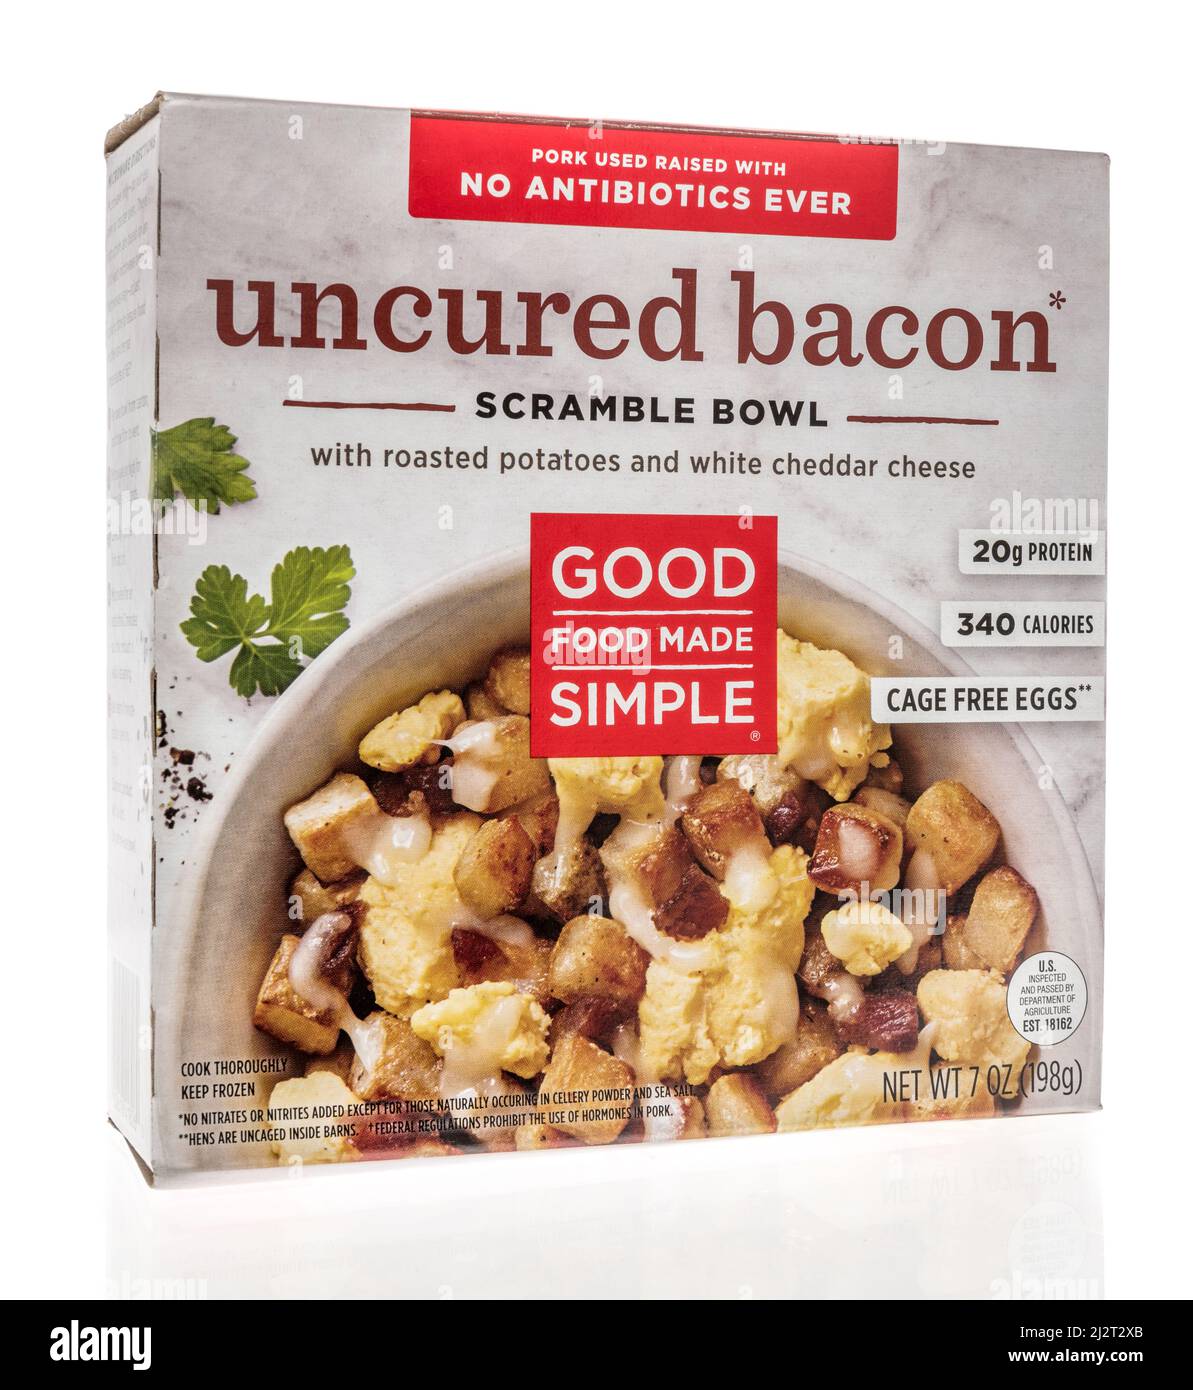 Winneconne, WI -2 April 2022: A package of Good food made simple uncured bacon scramble bowl breakfast on an isolated background Stock Photo